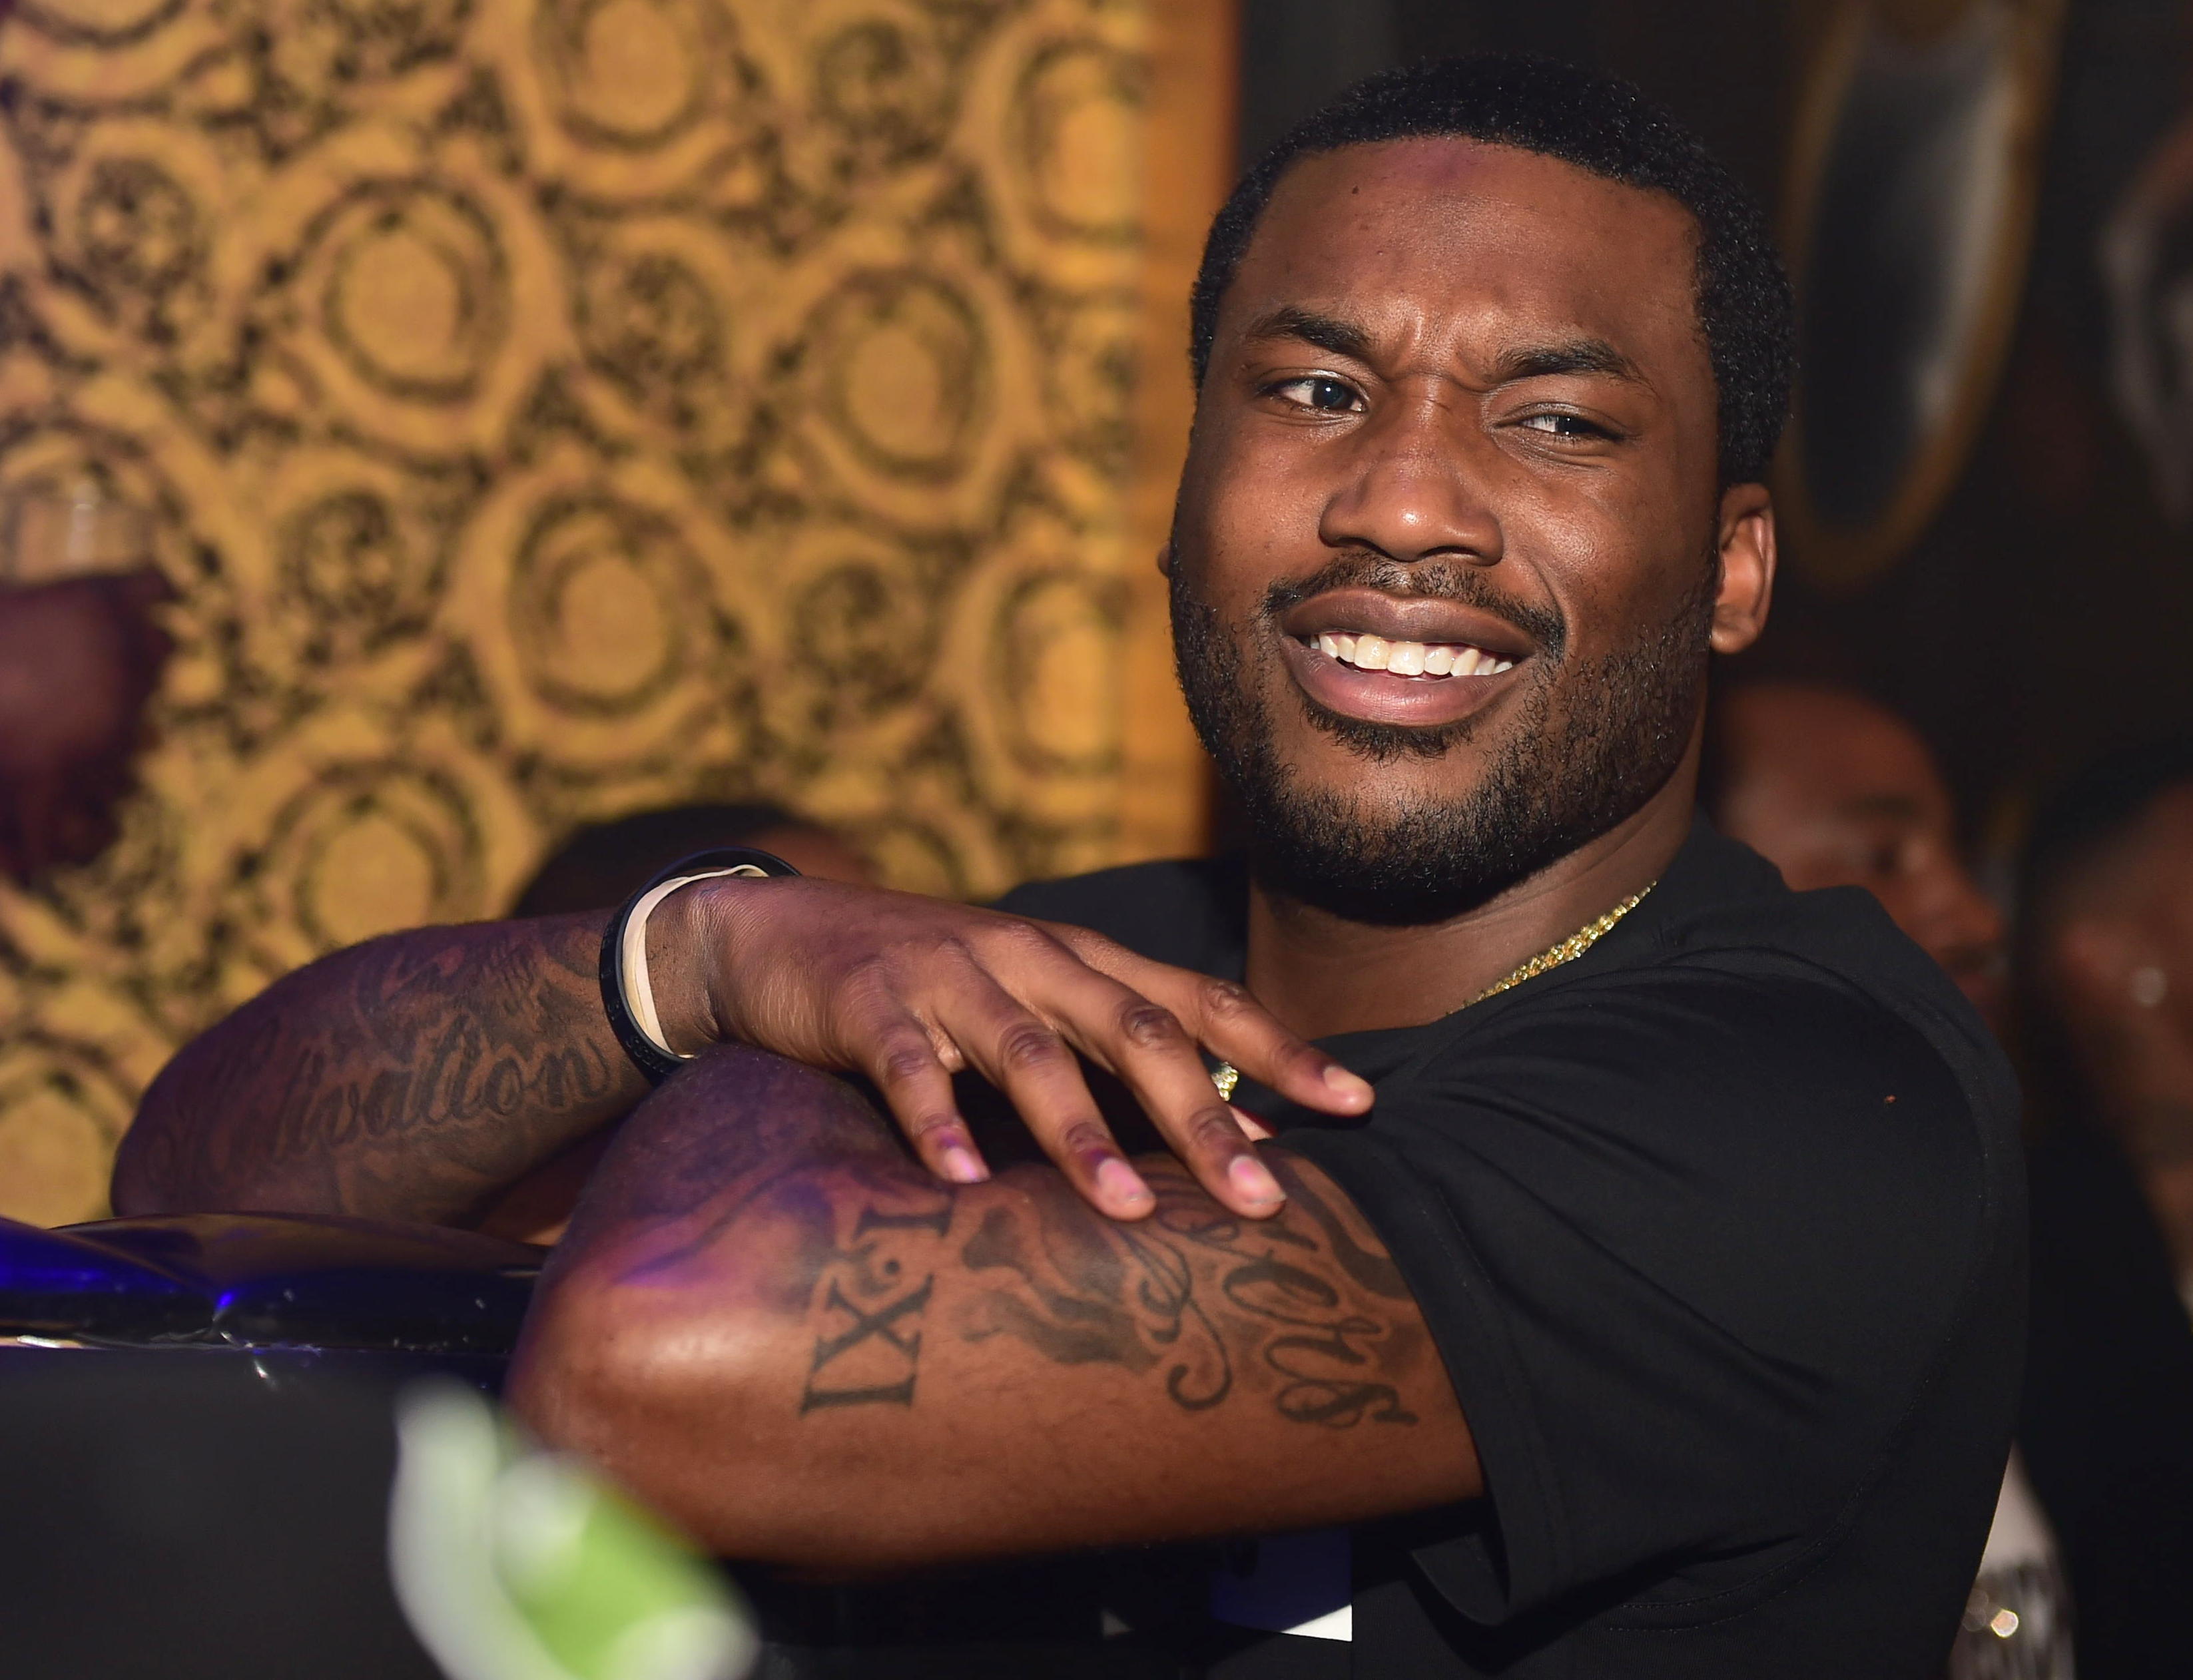 Medusa's 1 Year Anniversary Celebration Hosted By Meek Mill